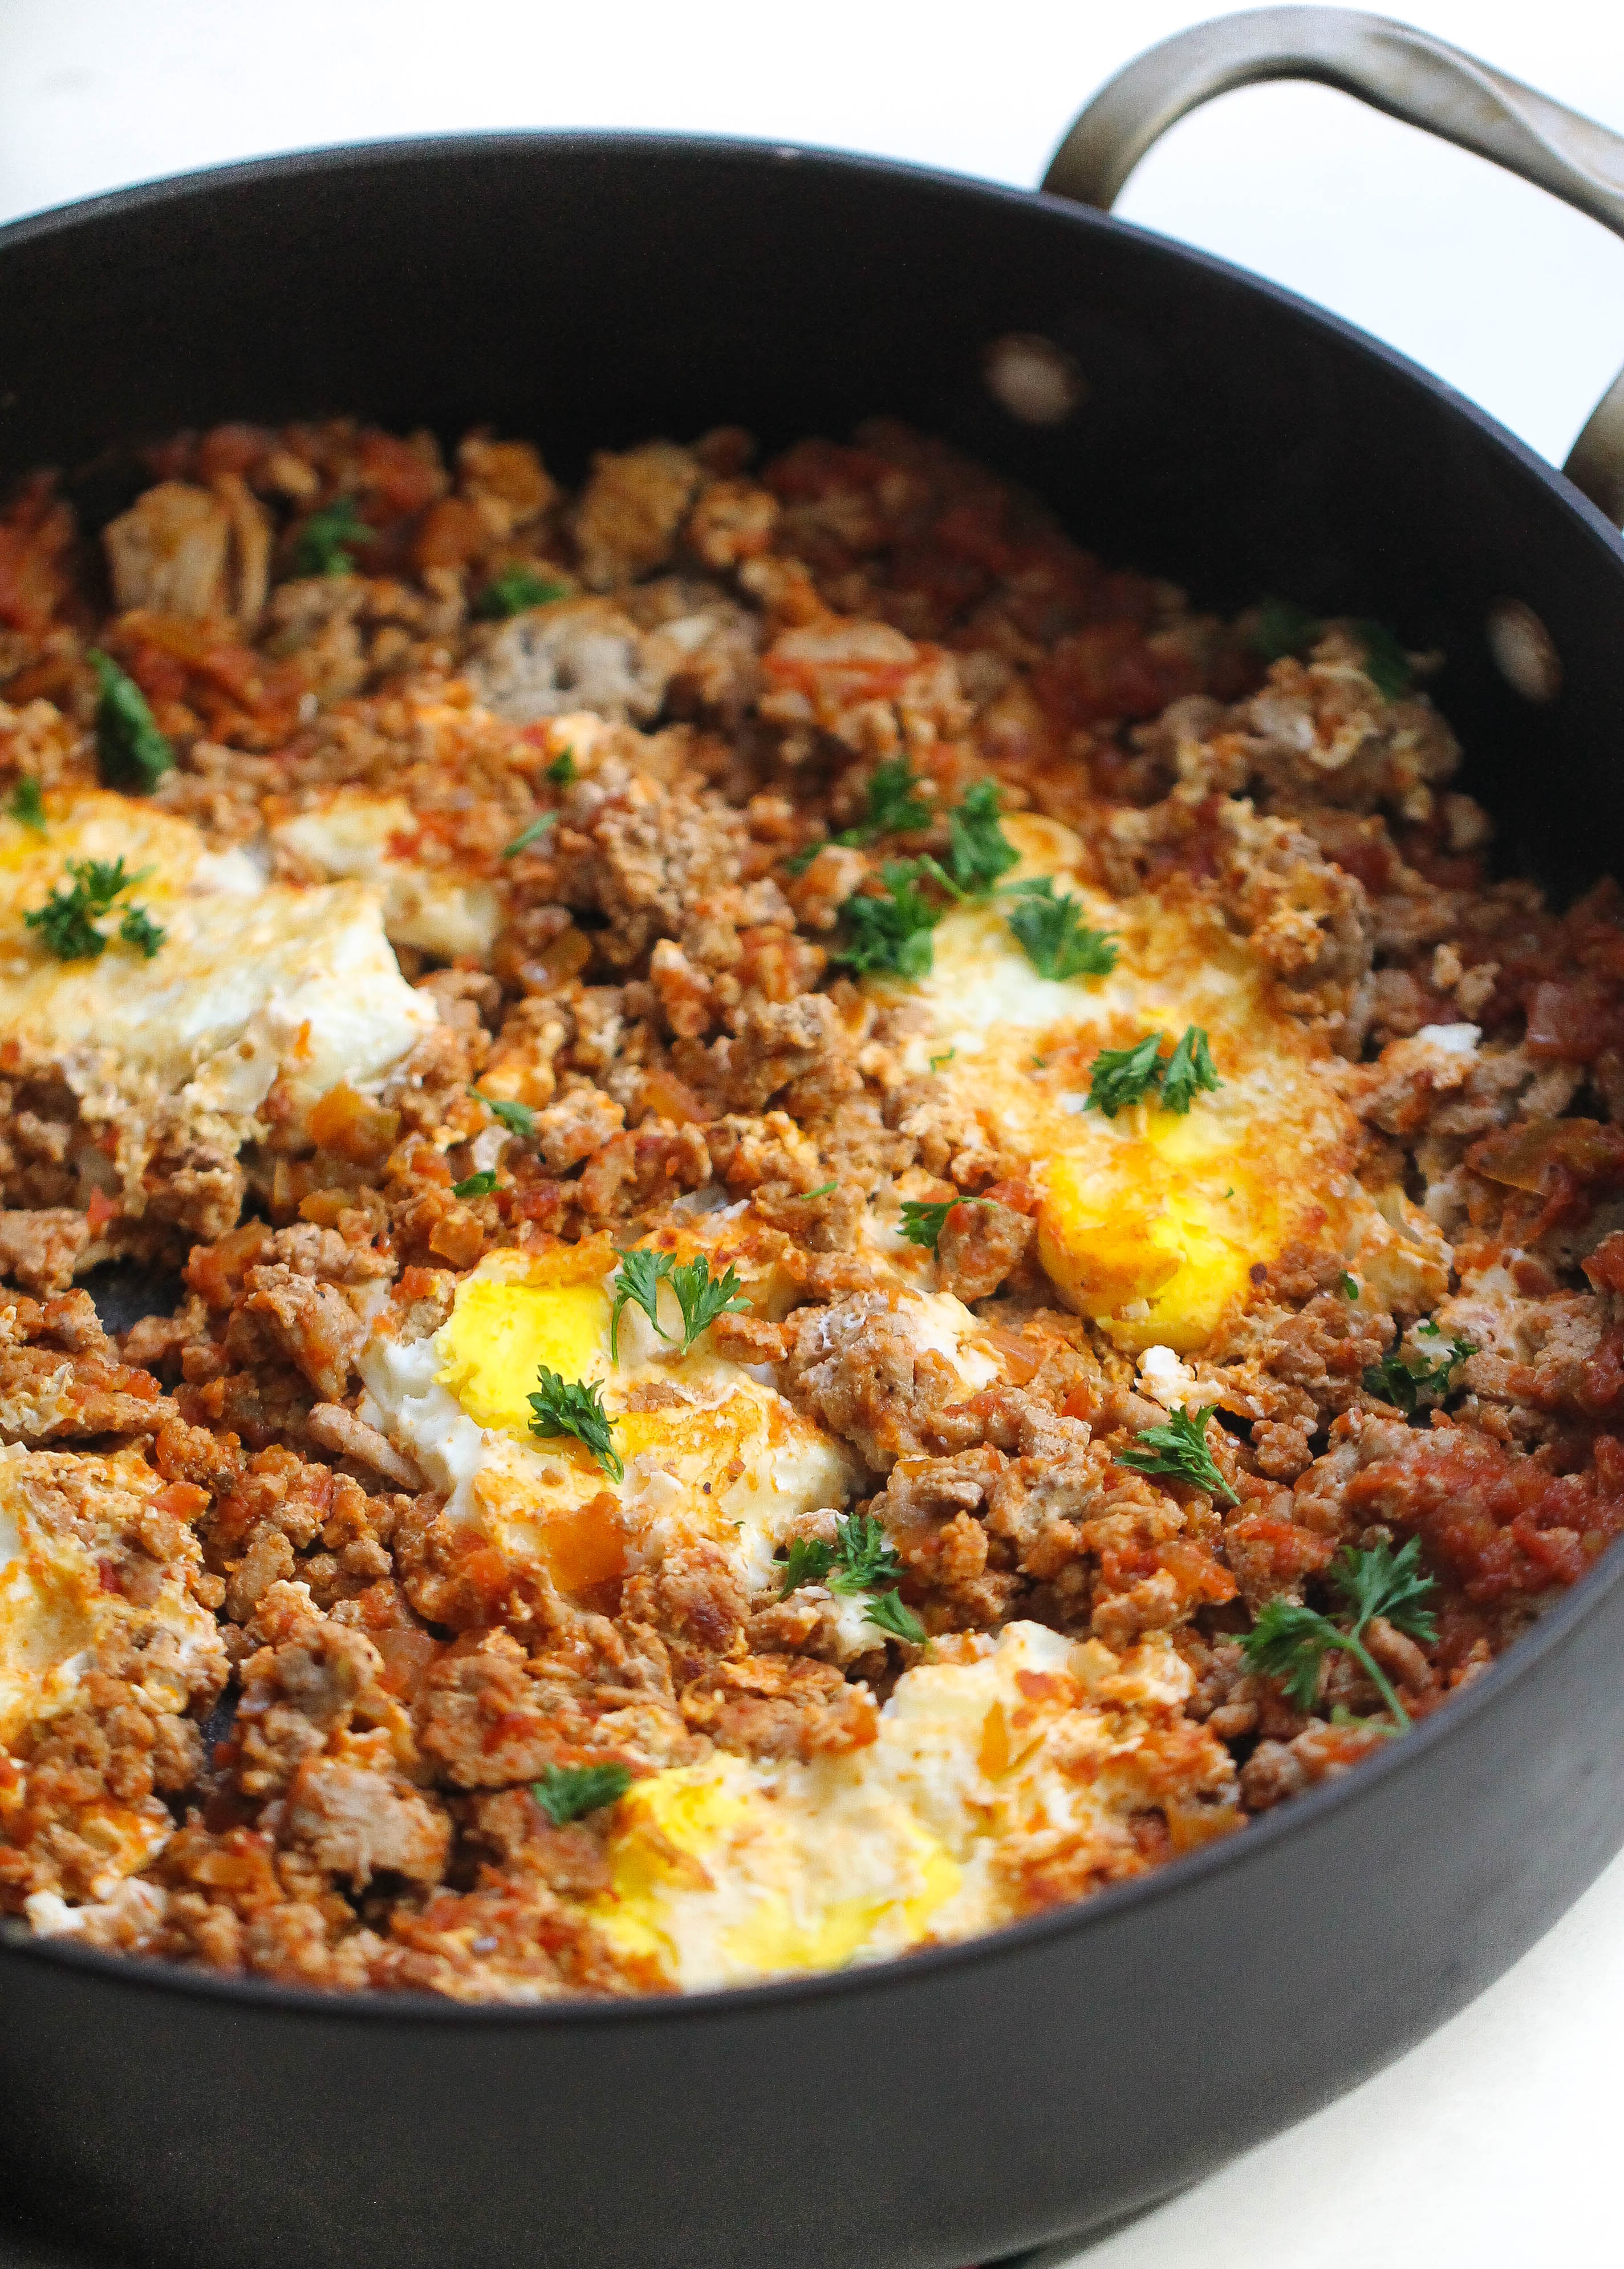 Healthy One Pan Egg and Turkey Skillet Recipe